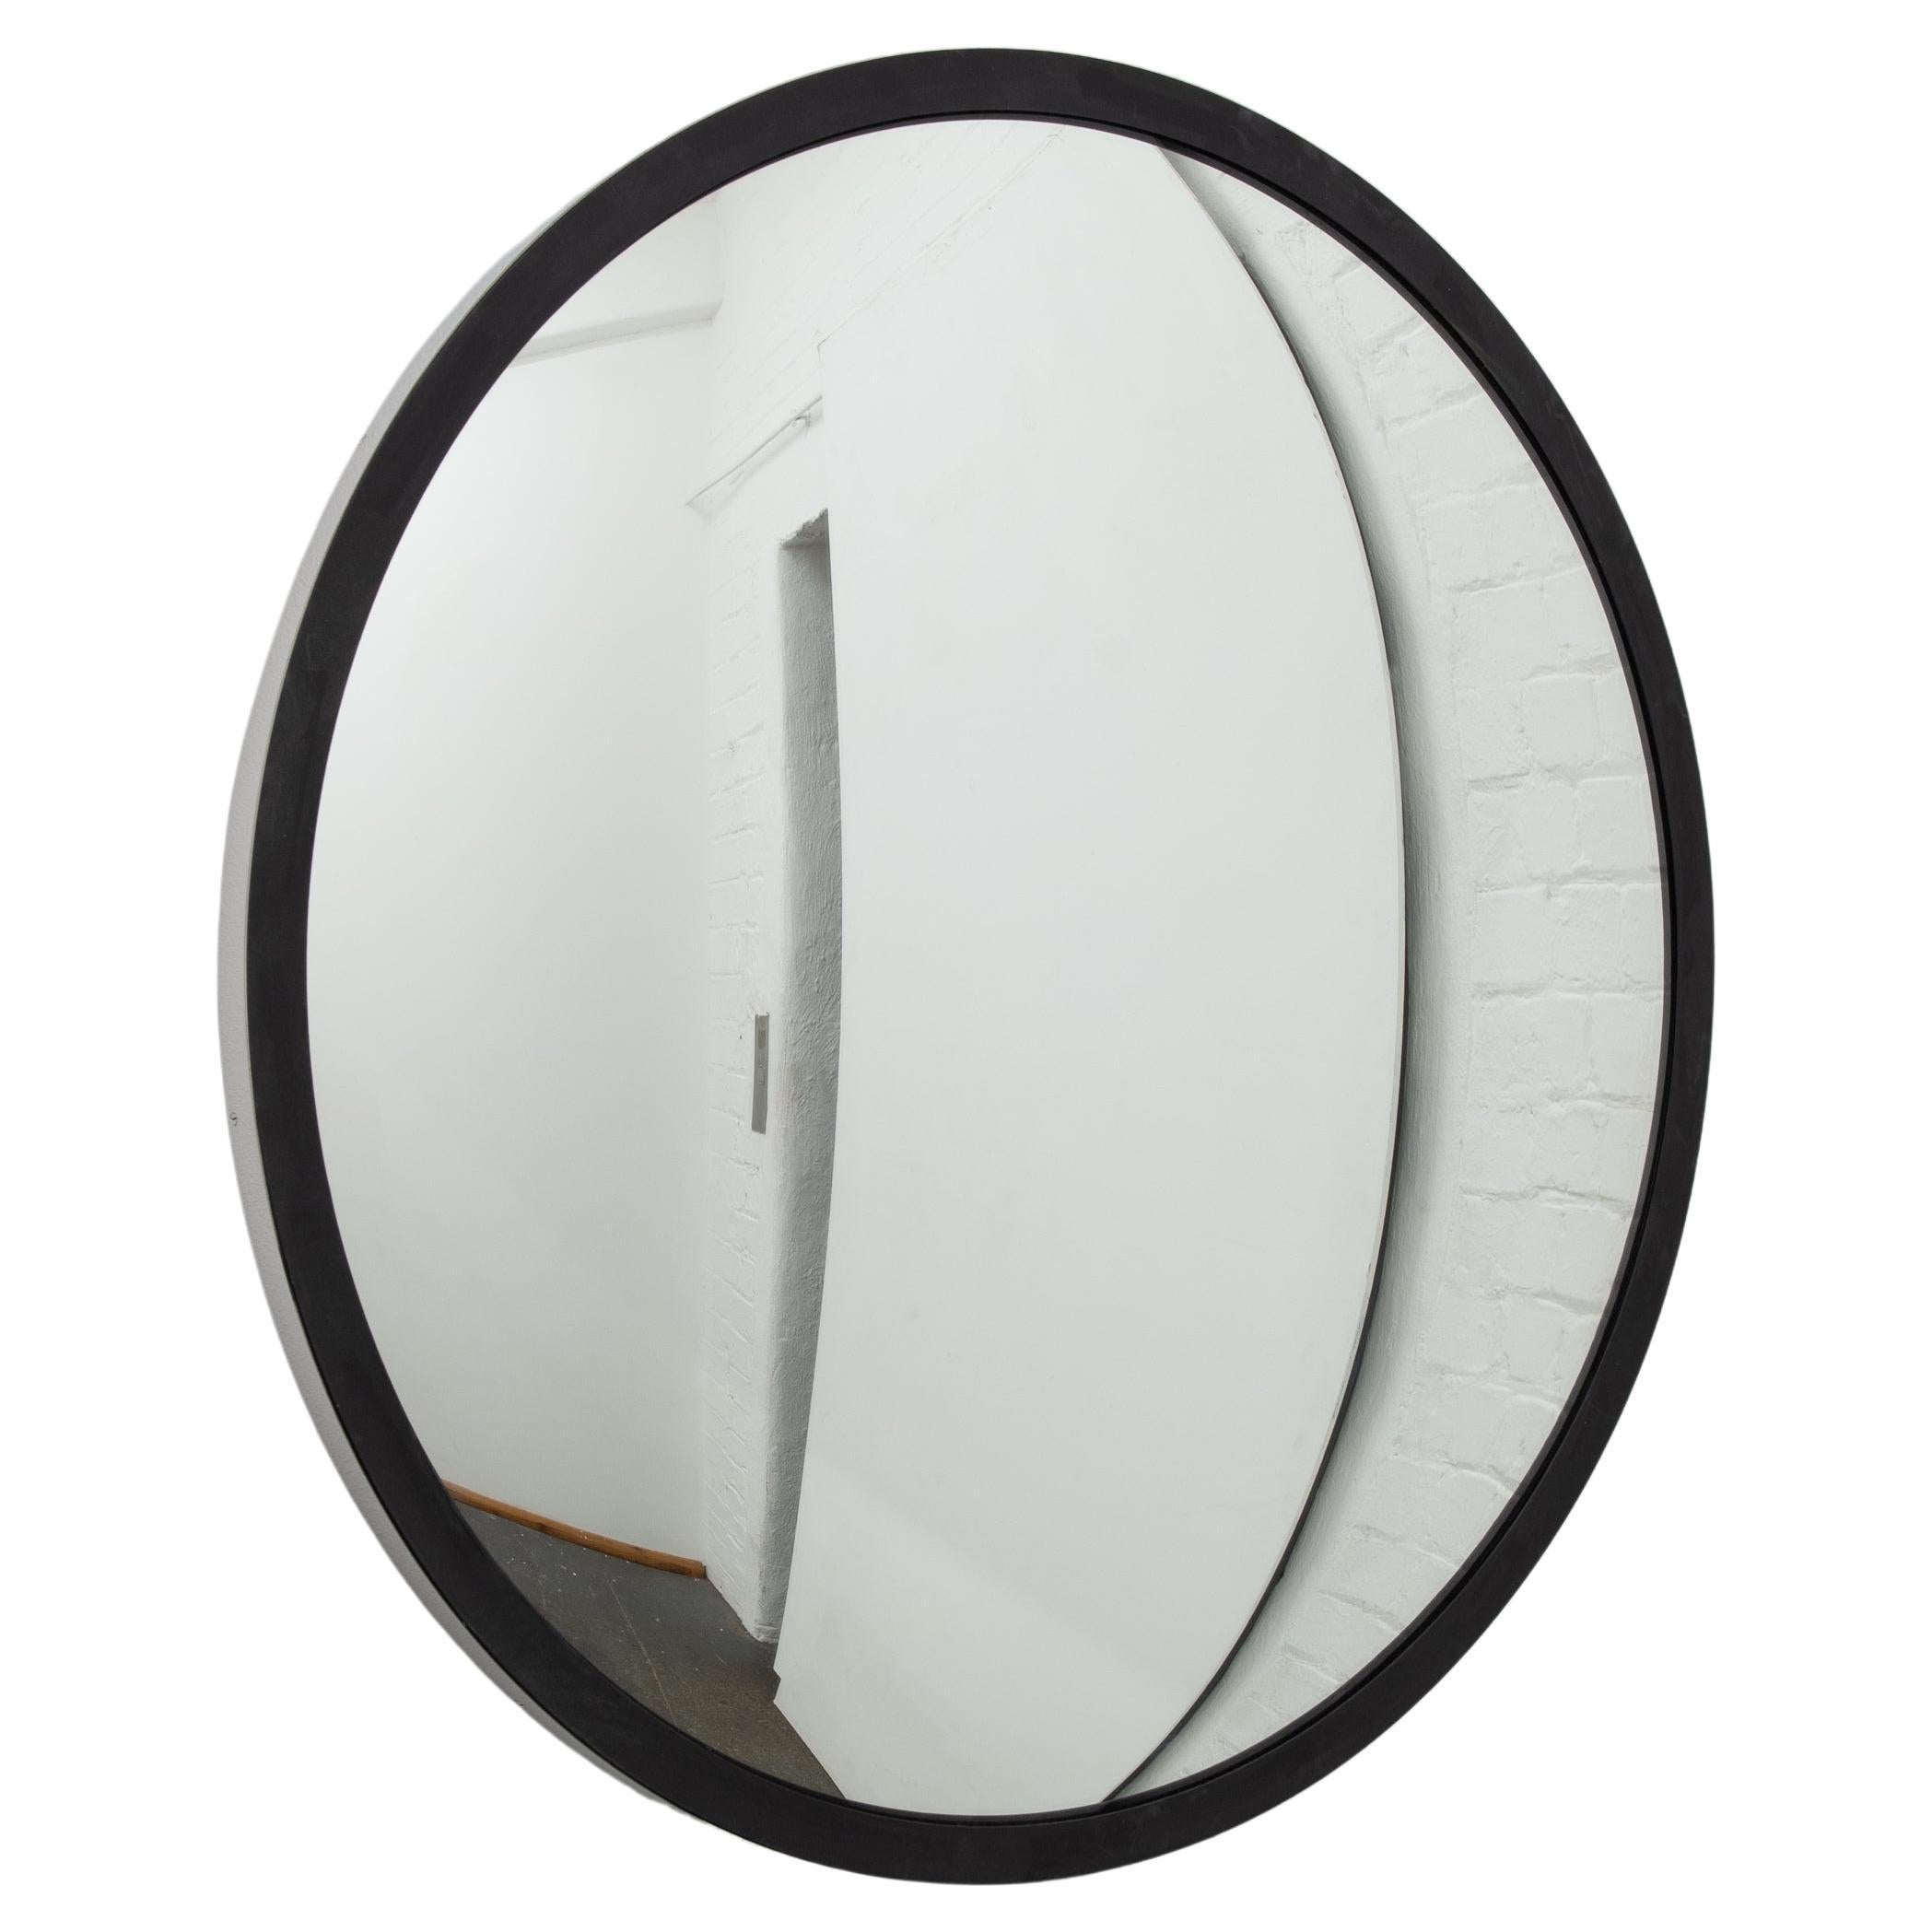 Orbis Handcrafted Round Convex Mirror, Stainless Steel and Black Frame, Large For Sale